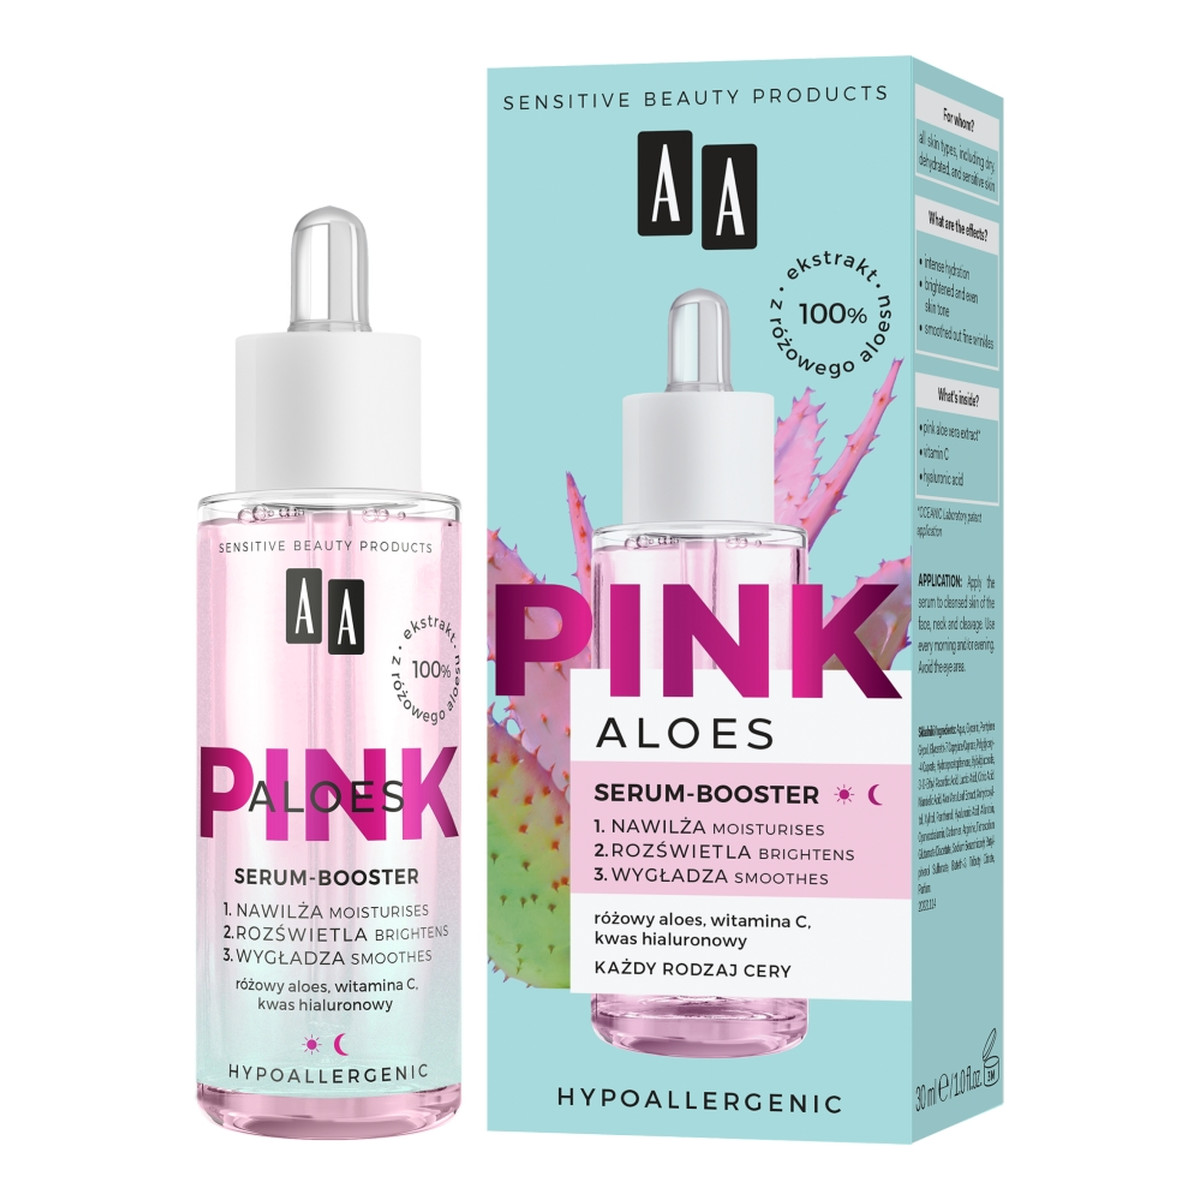 AA Aloes pink serum-booster 30ml